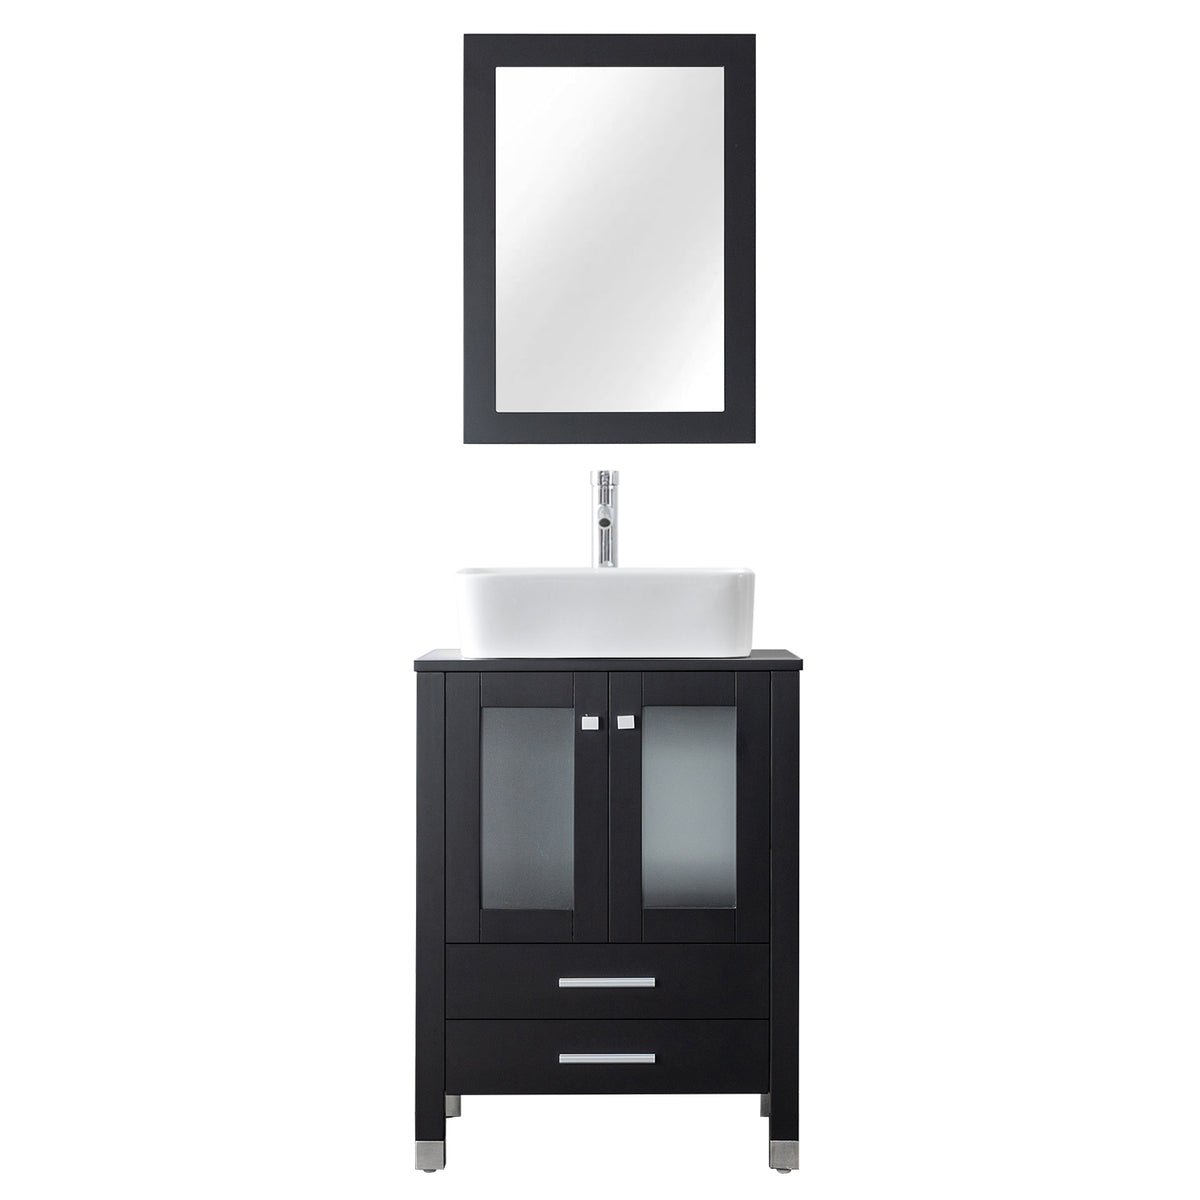 Eclife 24" Bathroom Vanity Solid Wood Construction & Painted Frame W/Mirror - Black